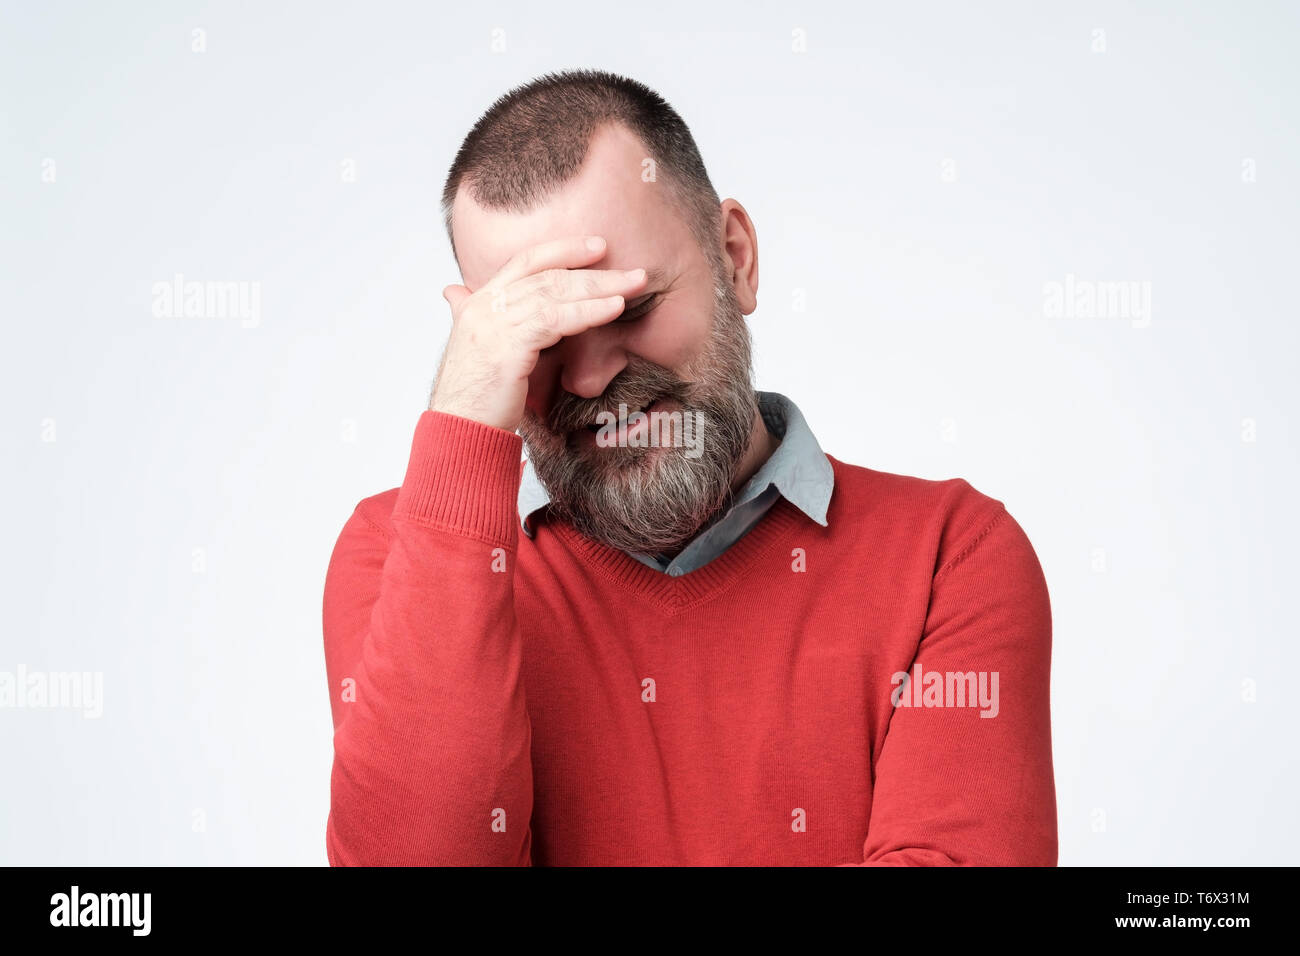 Mature man making facepalm gesture, covering eyes. Stock Photo